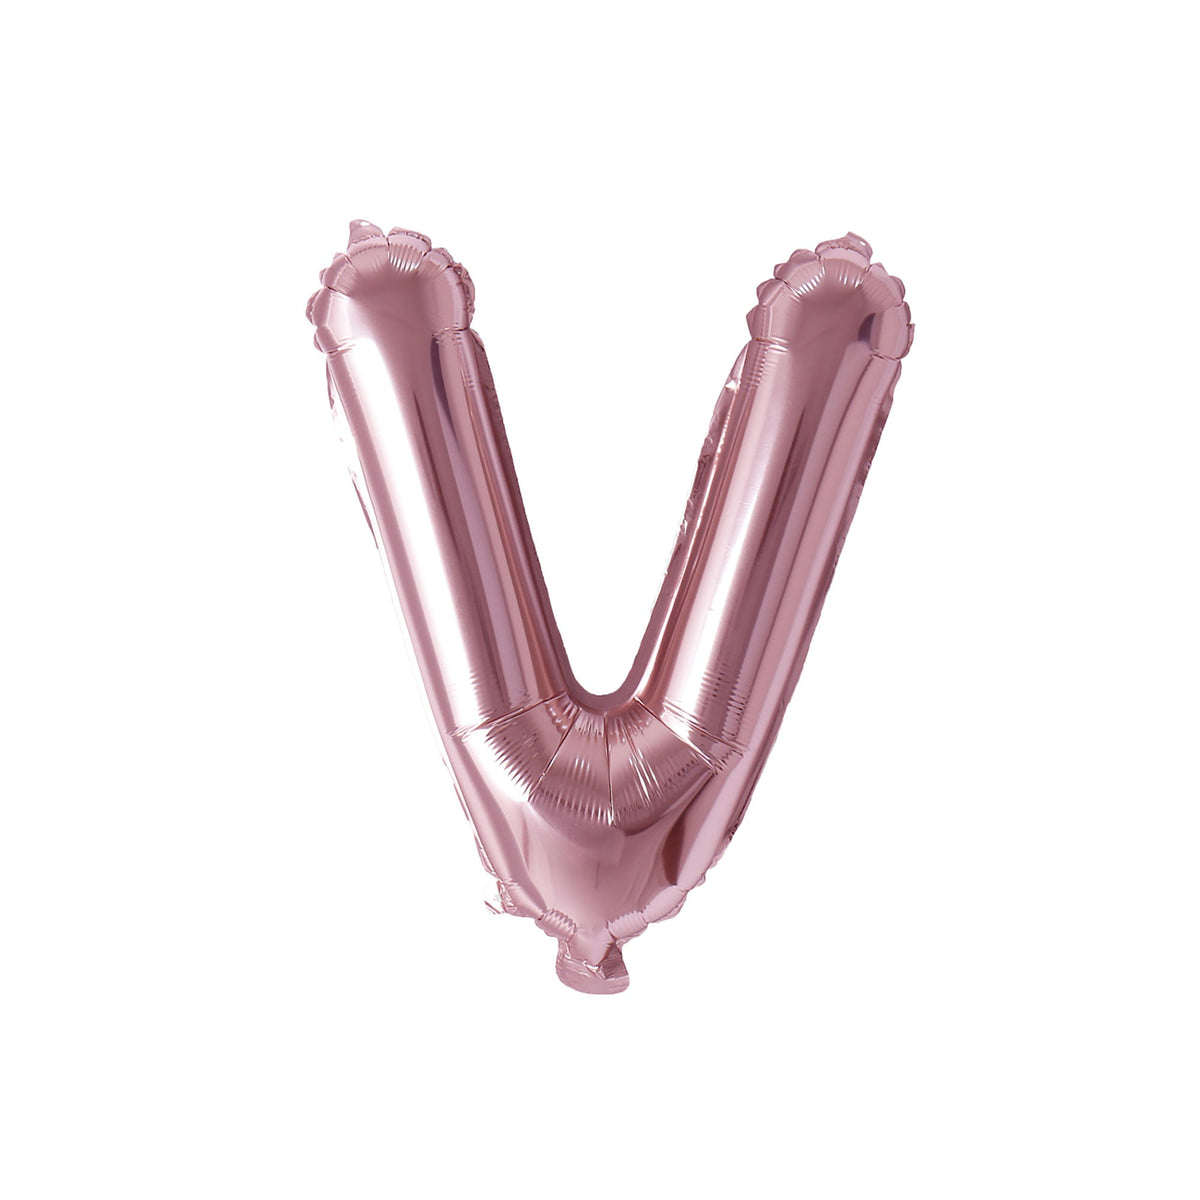 PARTY EXPERT Balloons Rose Gold Letter V Foil Balloon, 16 Inches, 1 Count 810064194405